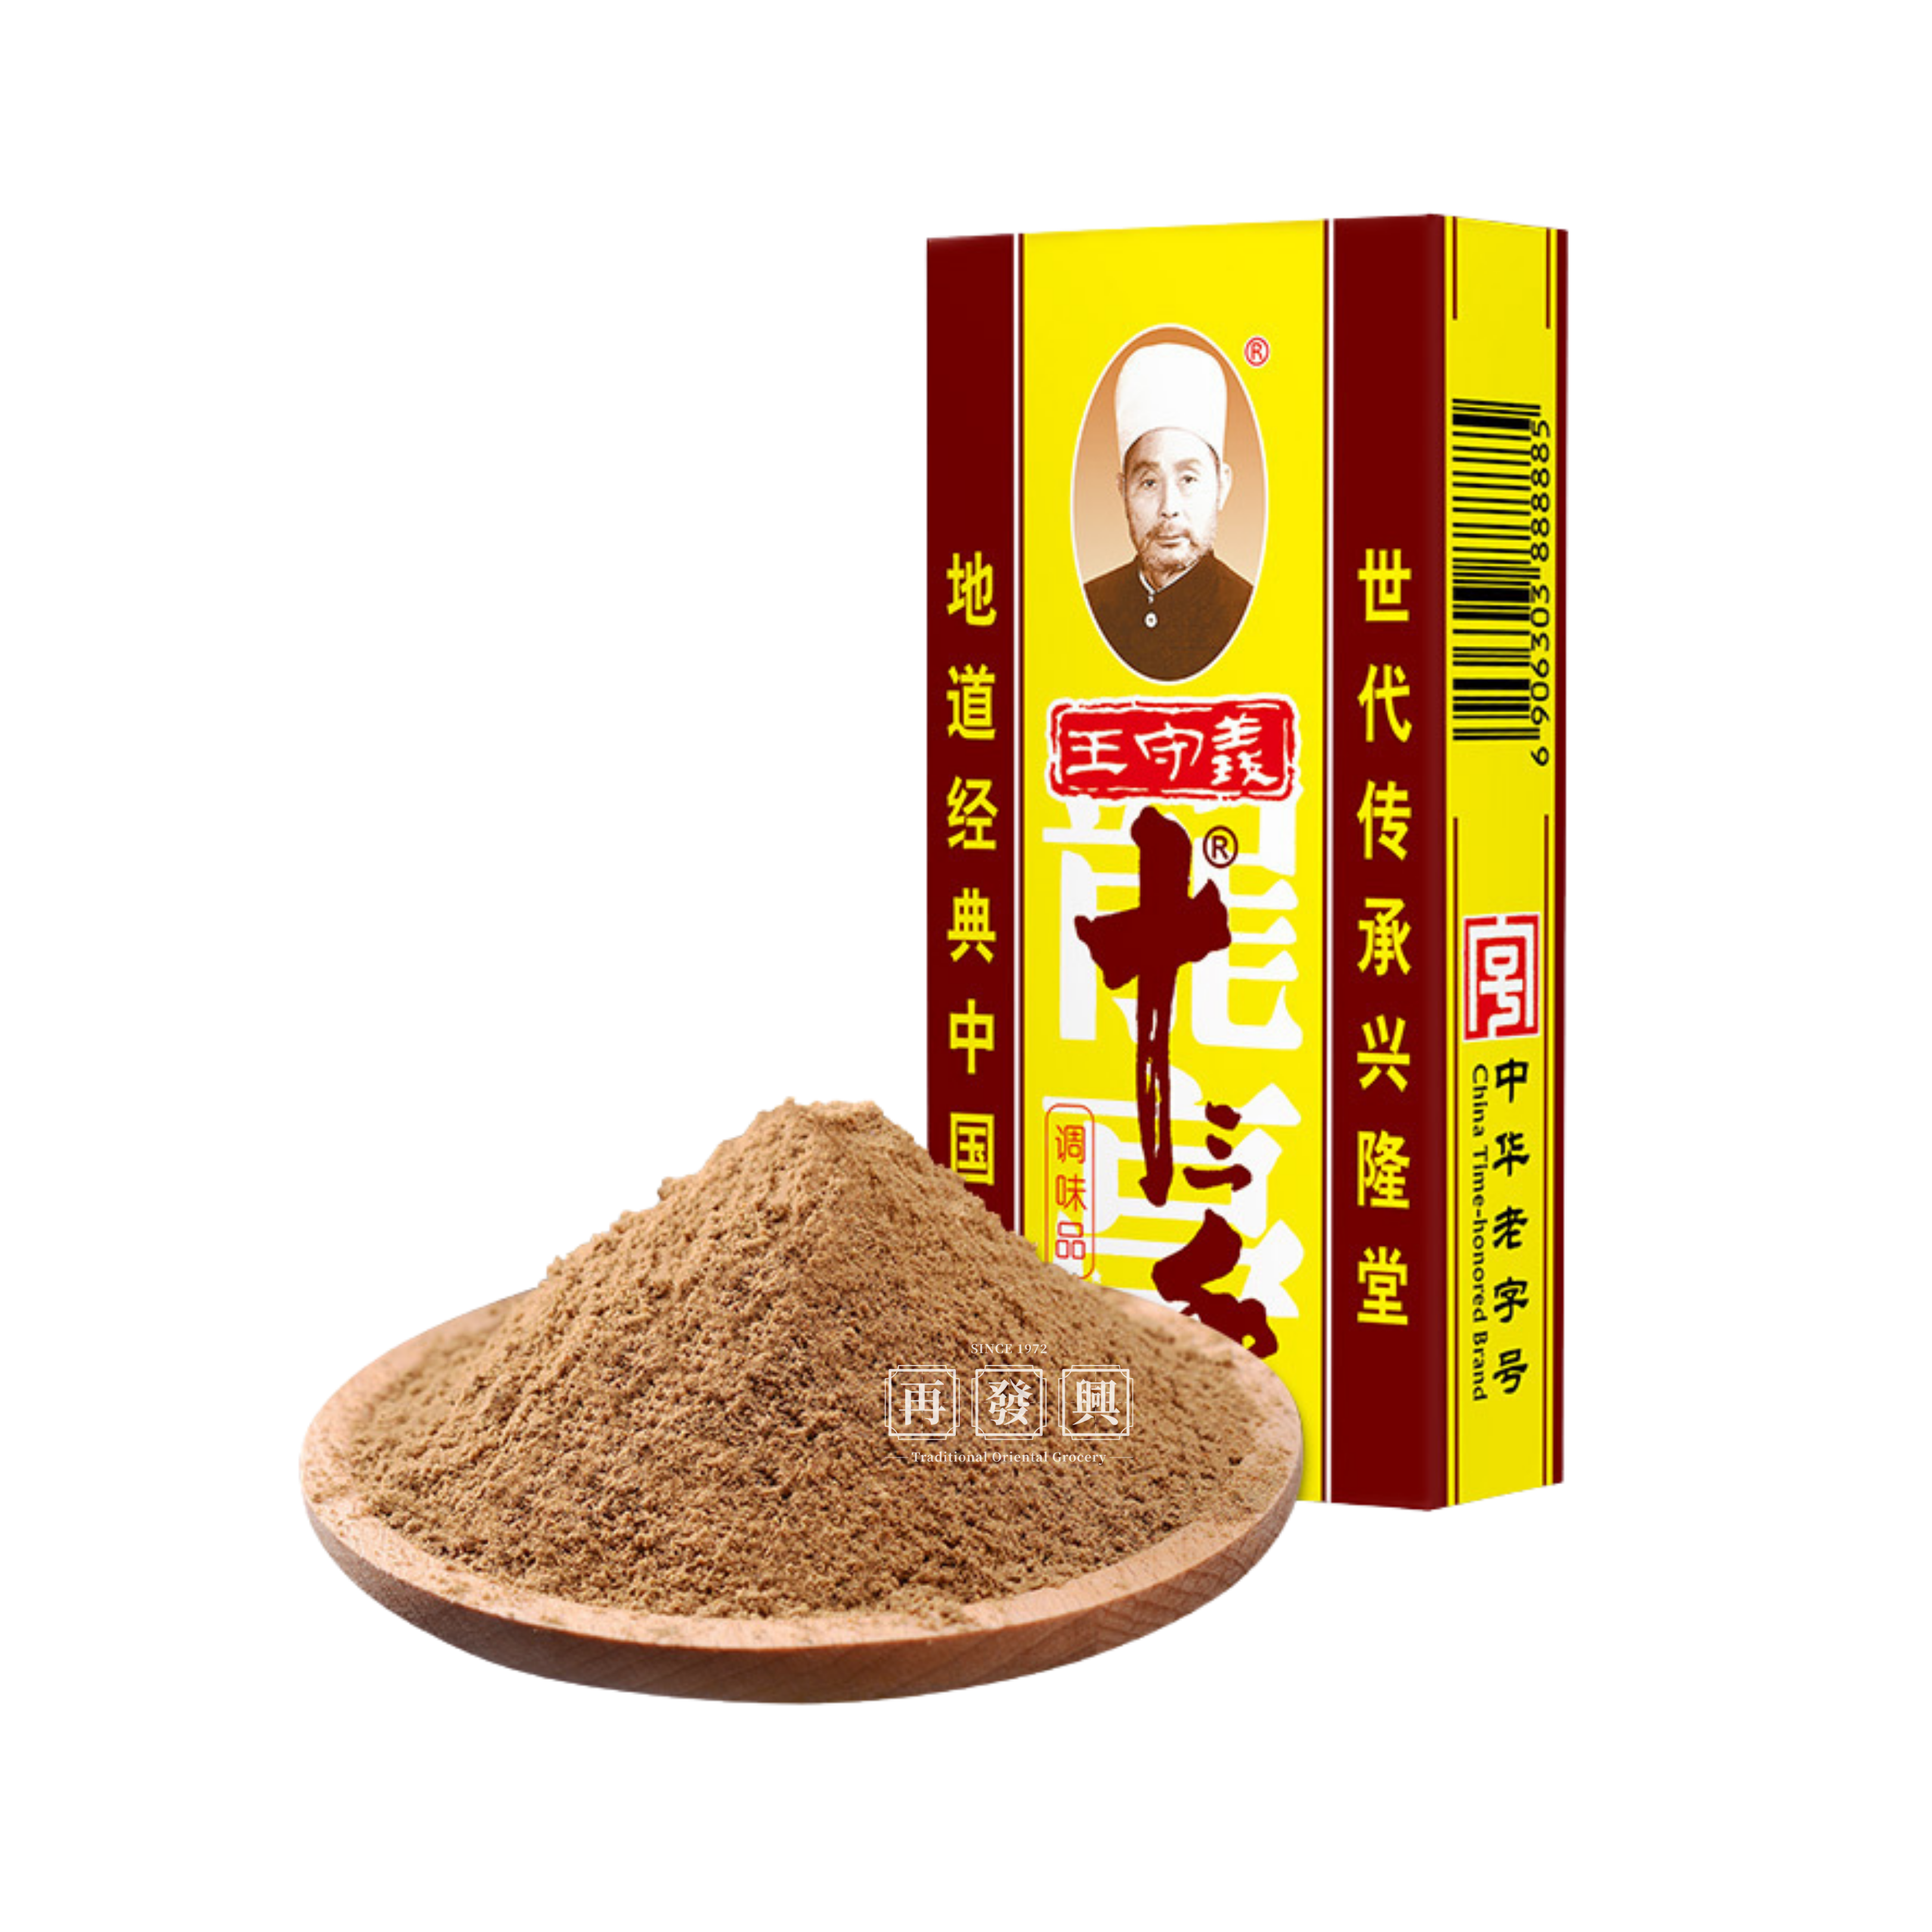 WSY Xin Jiang 13type Spices Powder 45g